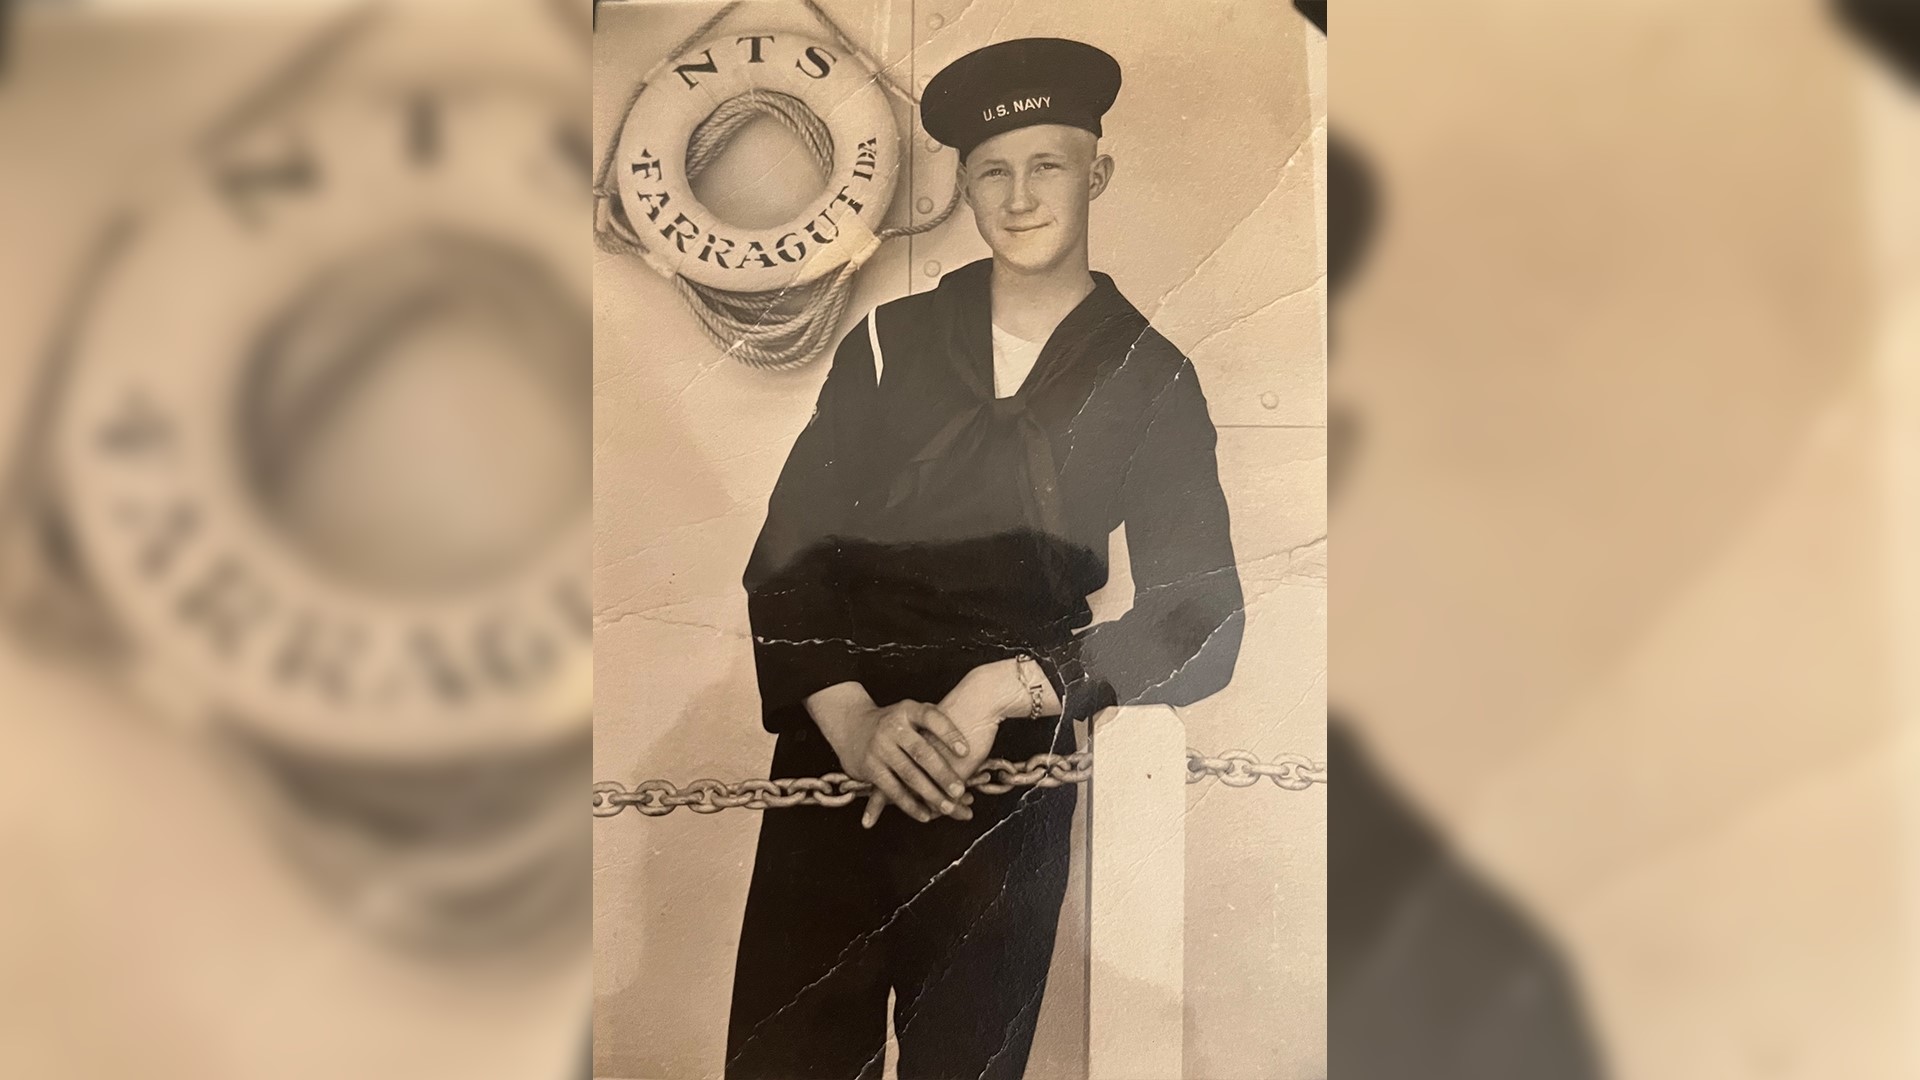 The Kansas native served in the Navy before becoming a lawyer.